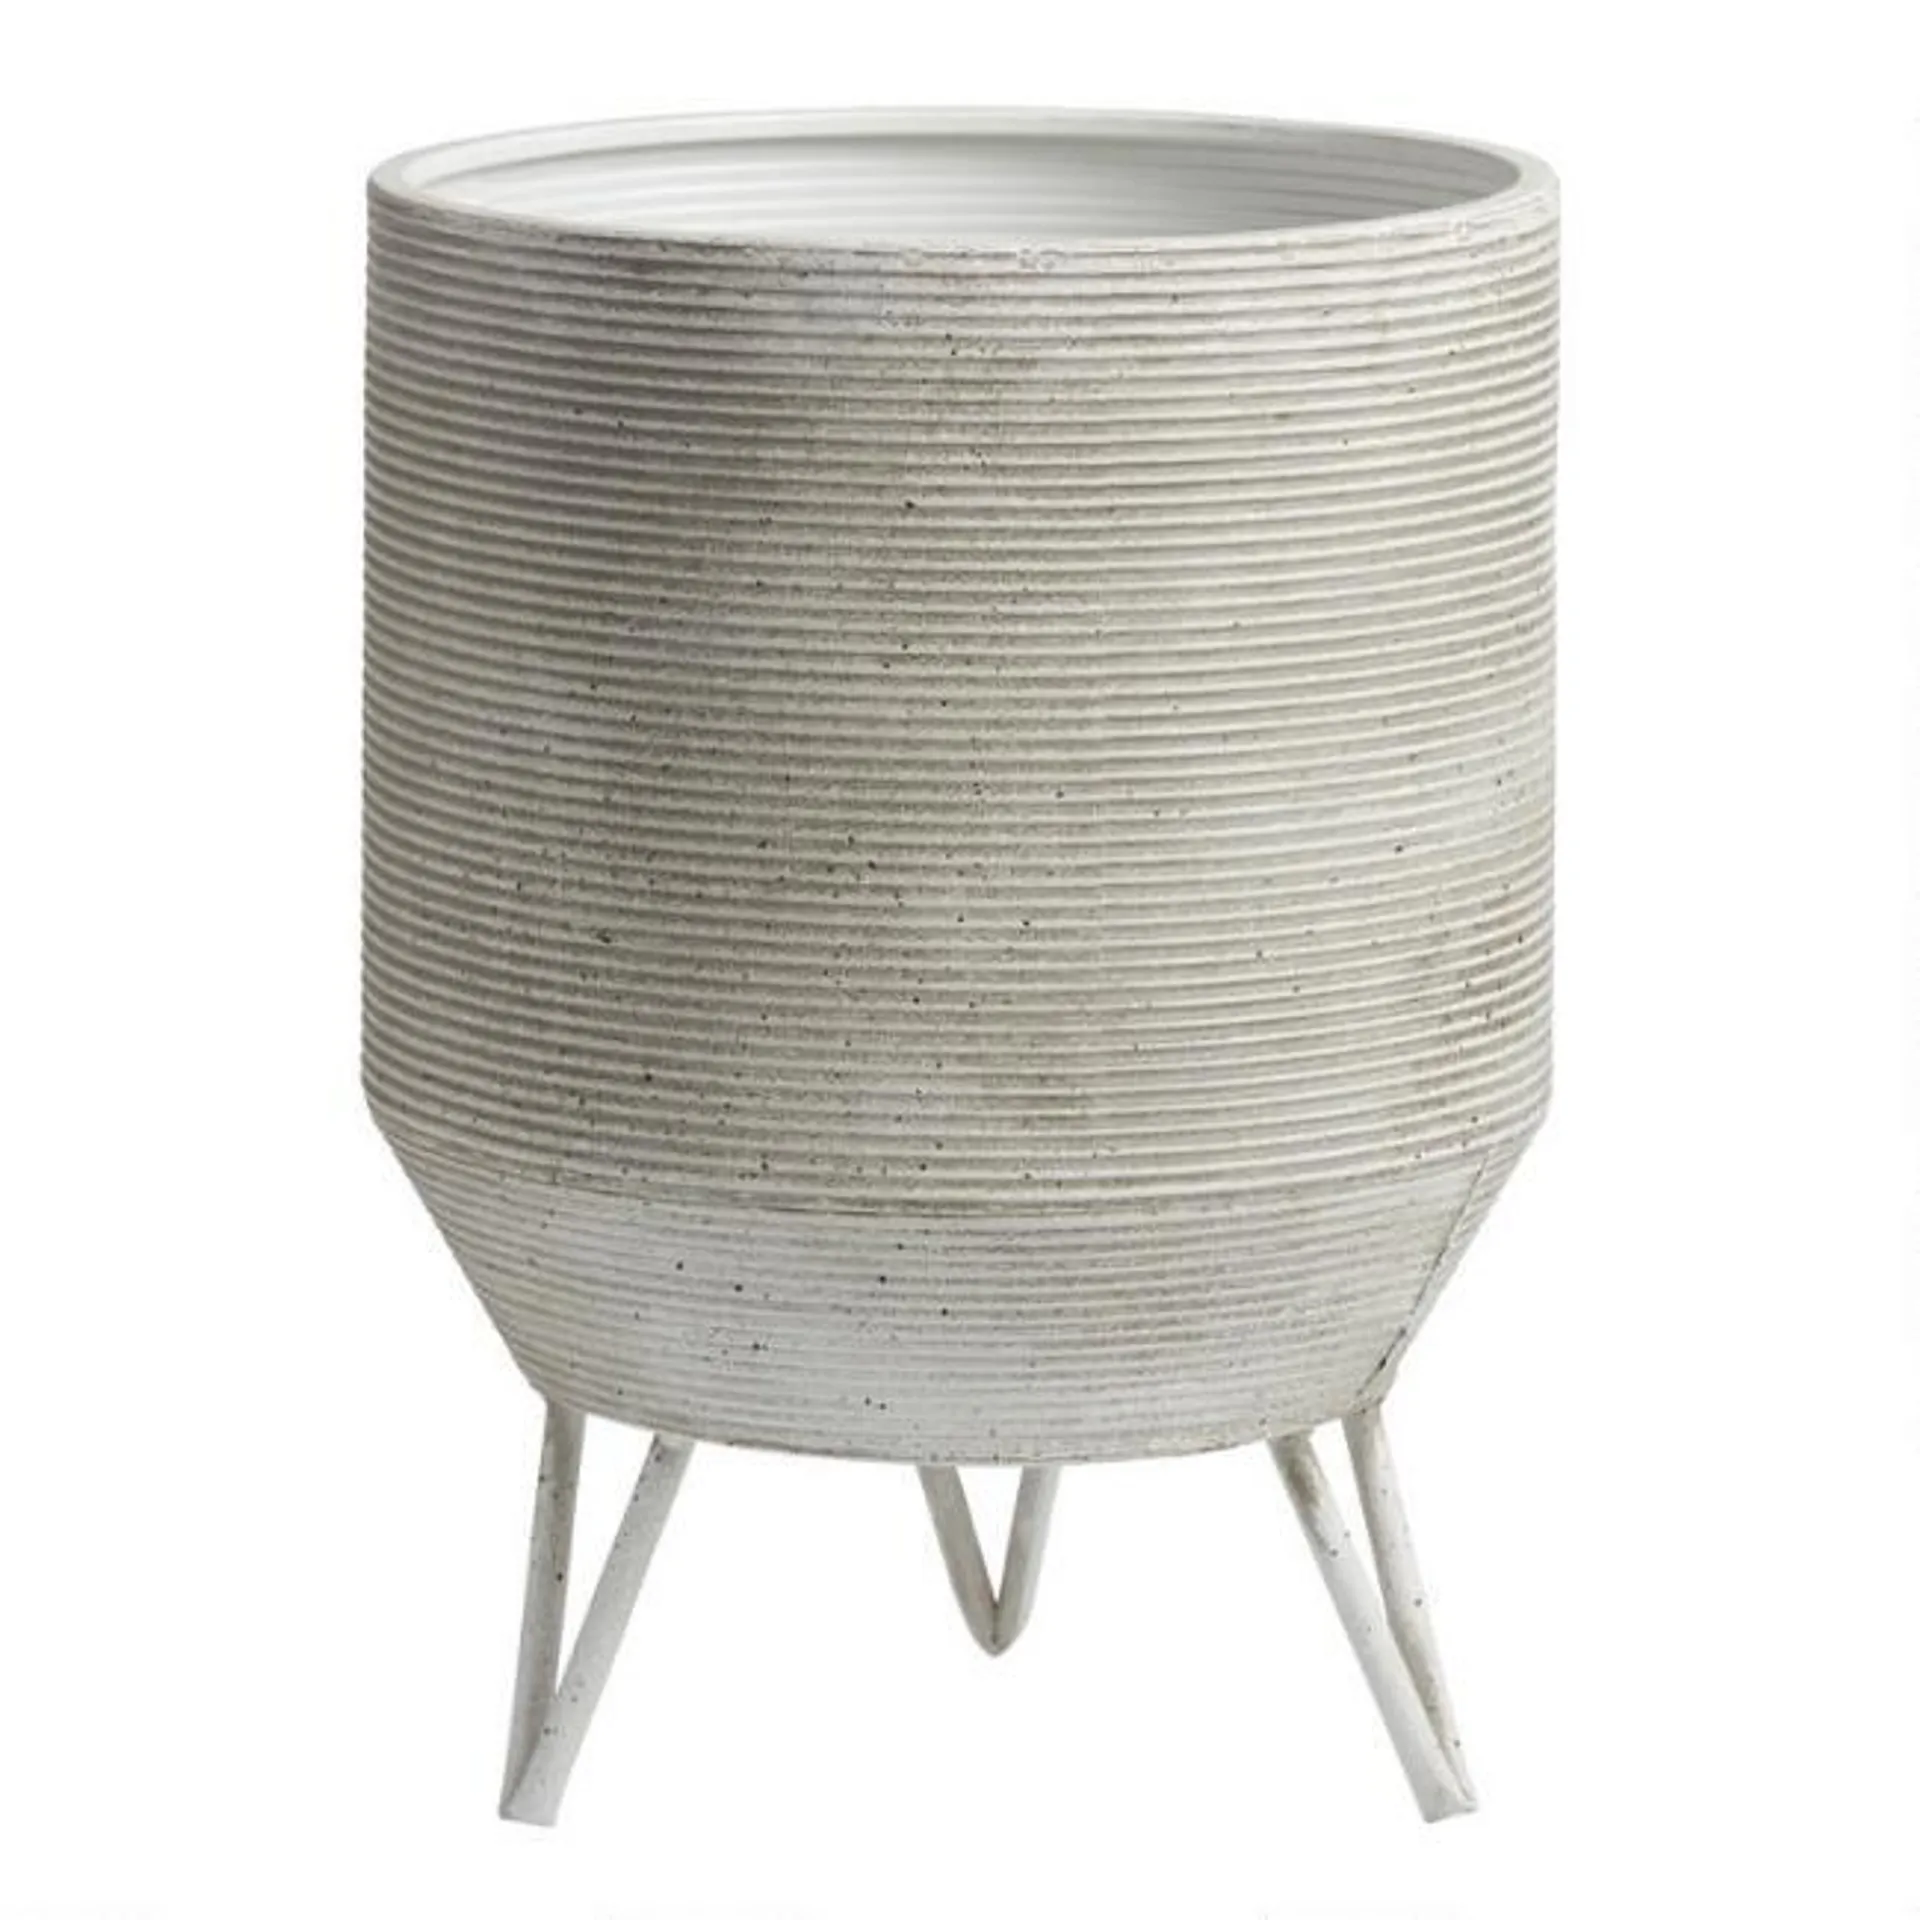 White and Black Metal Speckled Ribbed Planter